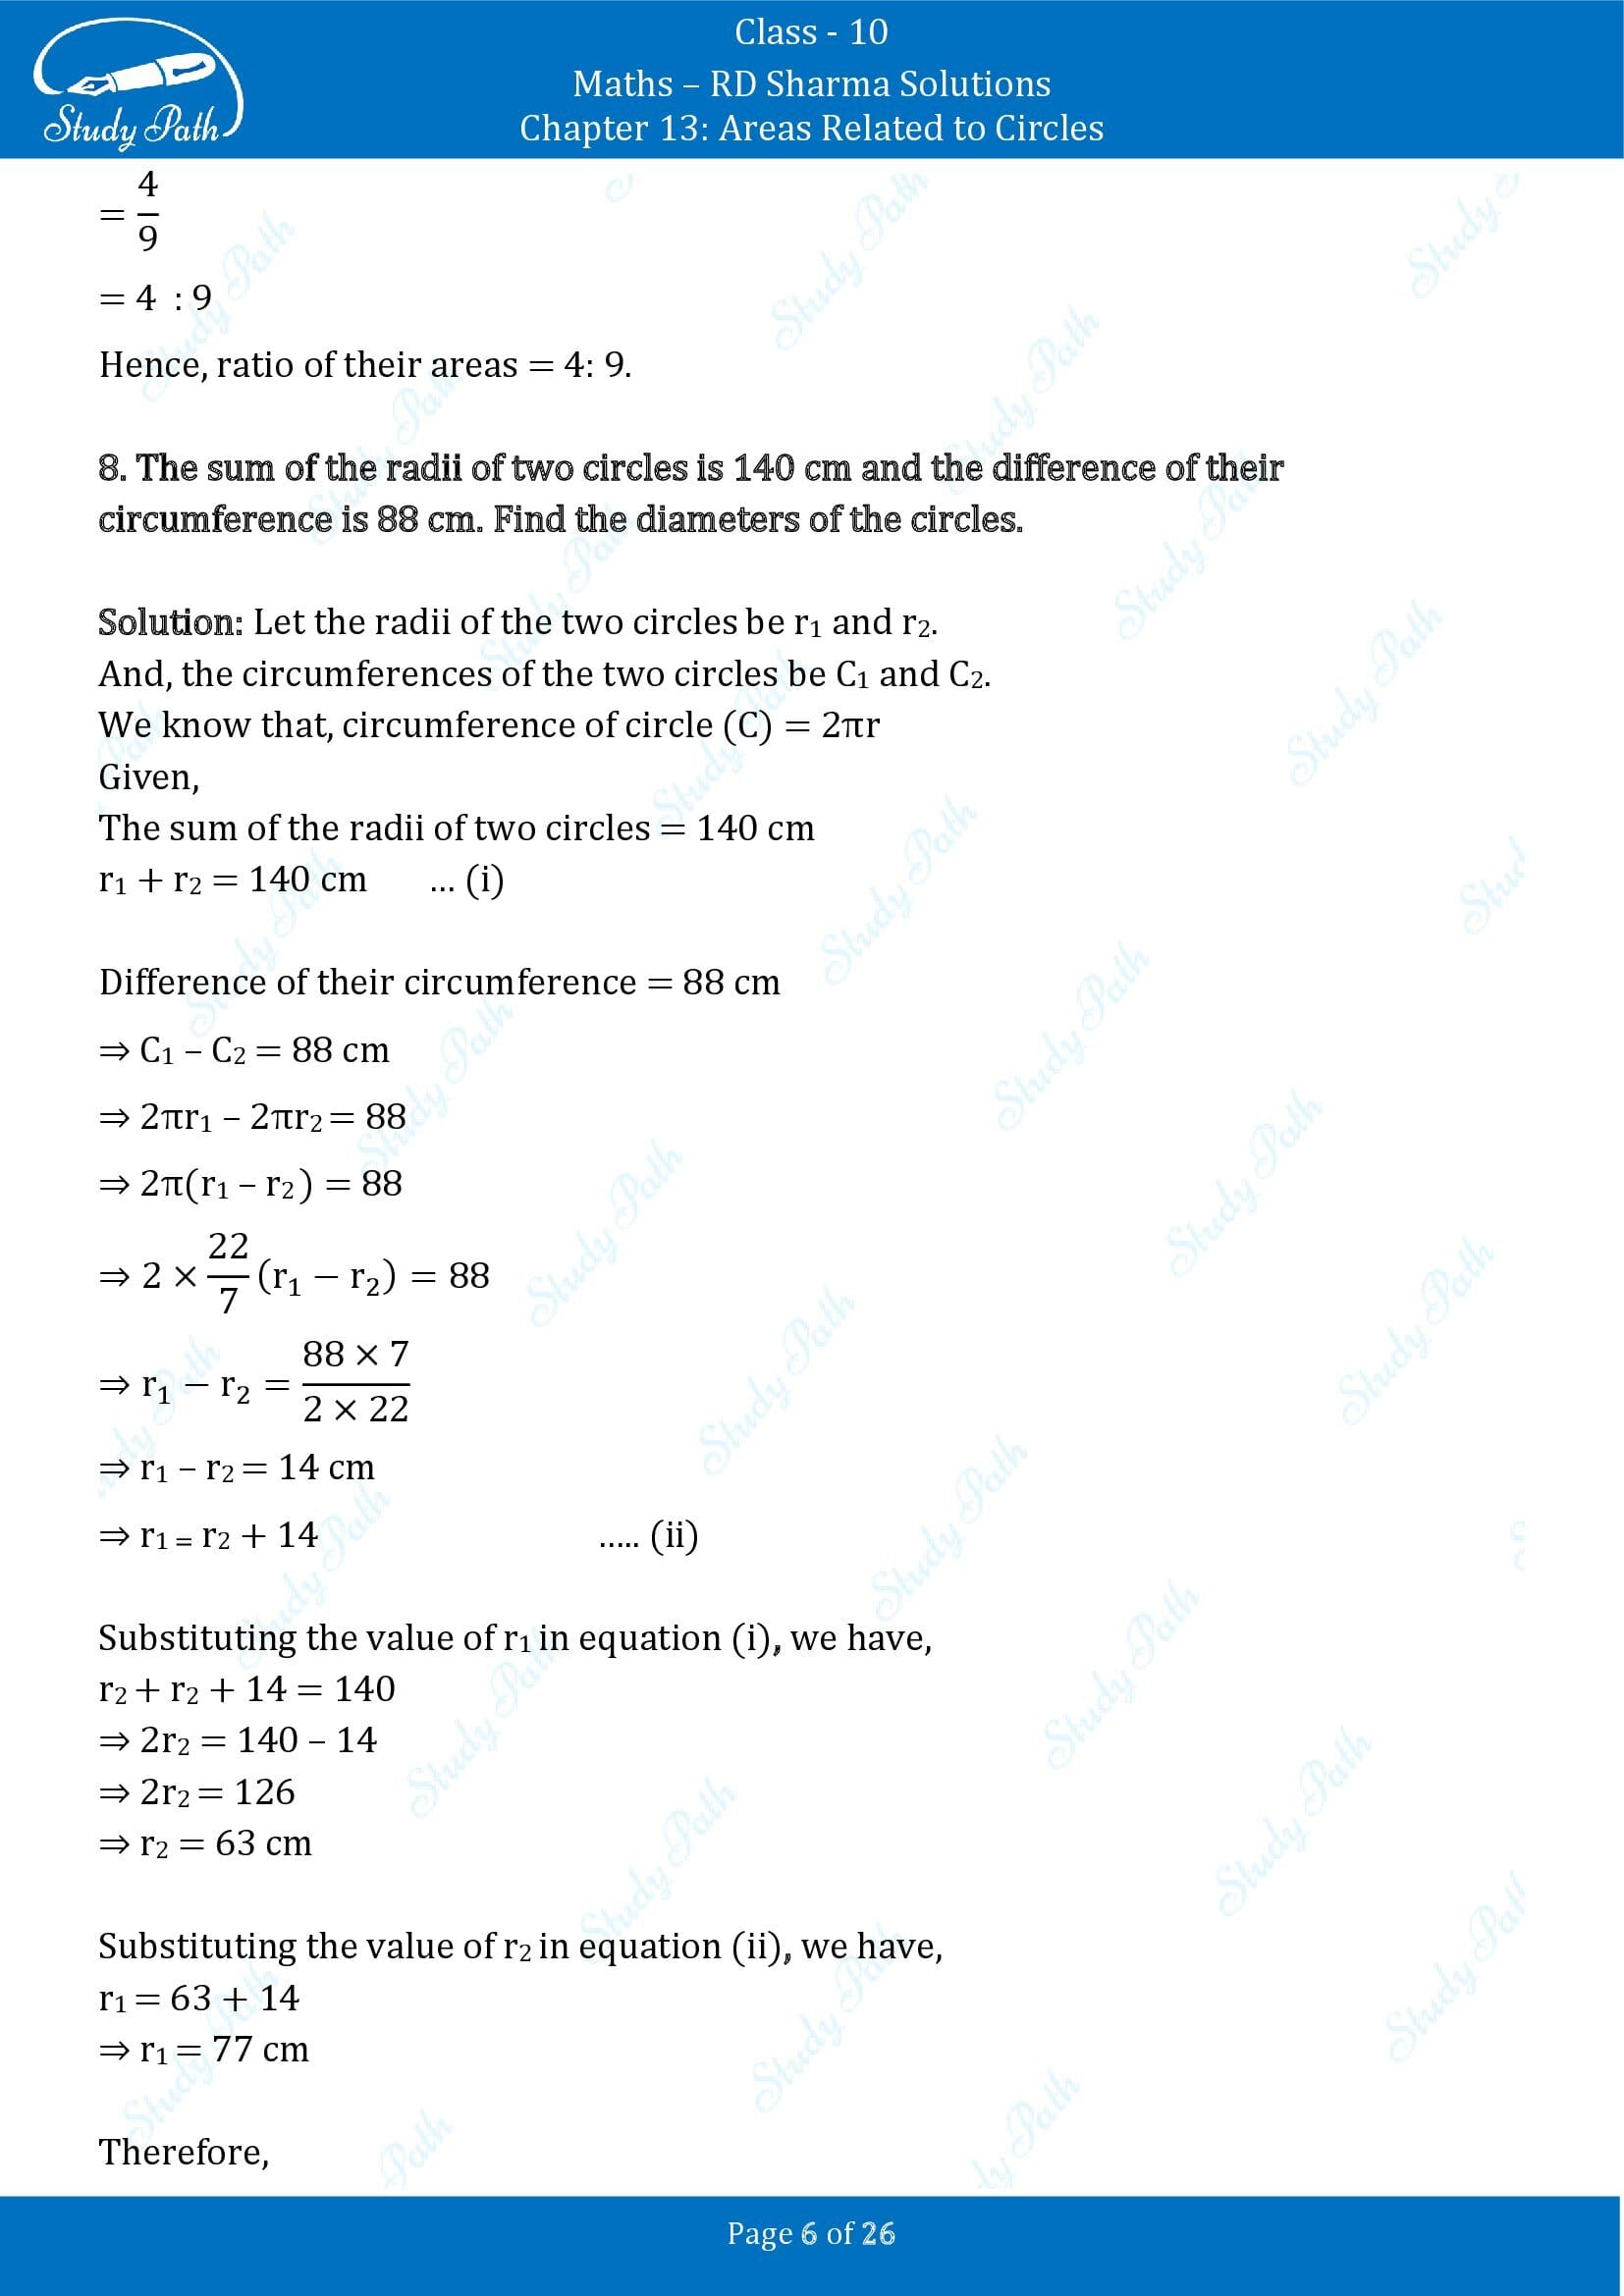 RD Sharma Solutions Class 10 Chapter 13 Areas Related to Circles Exercise 13.1 00006